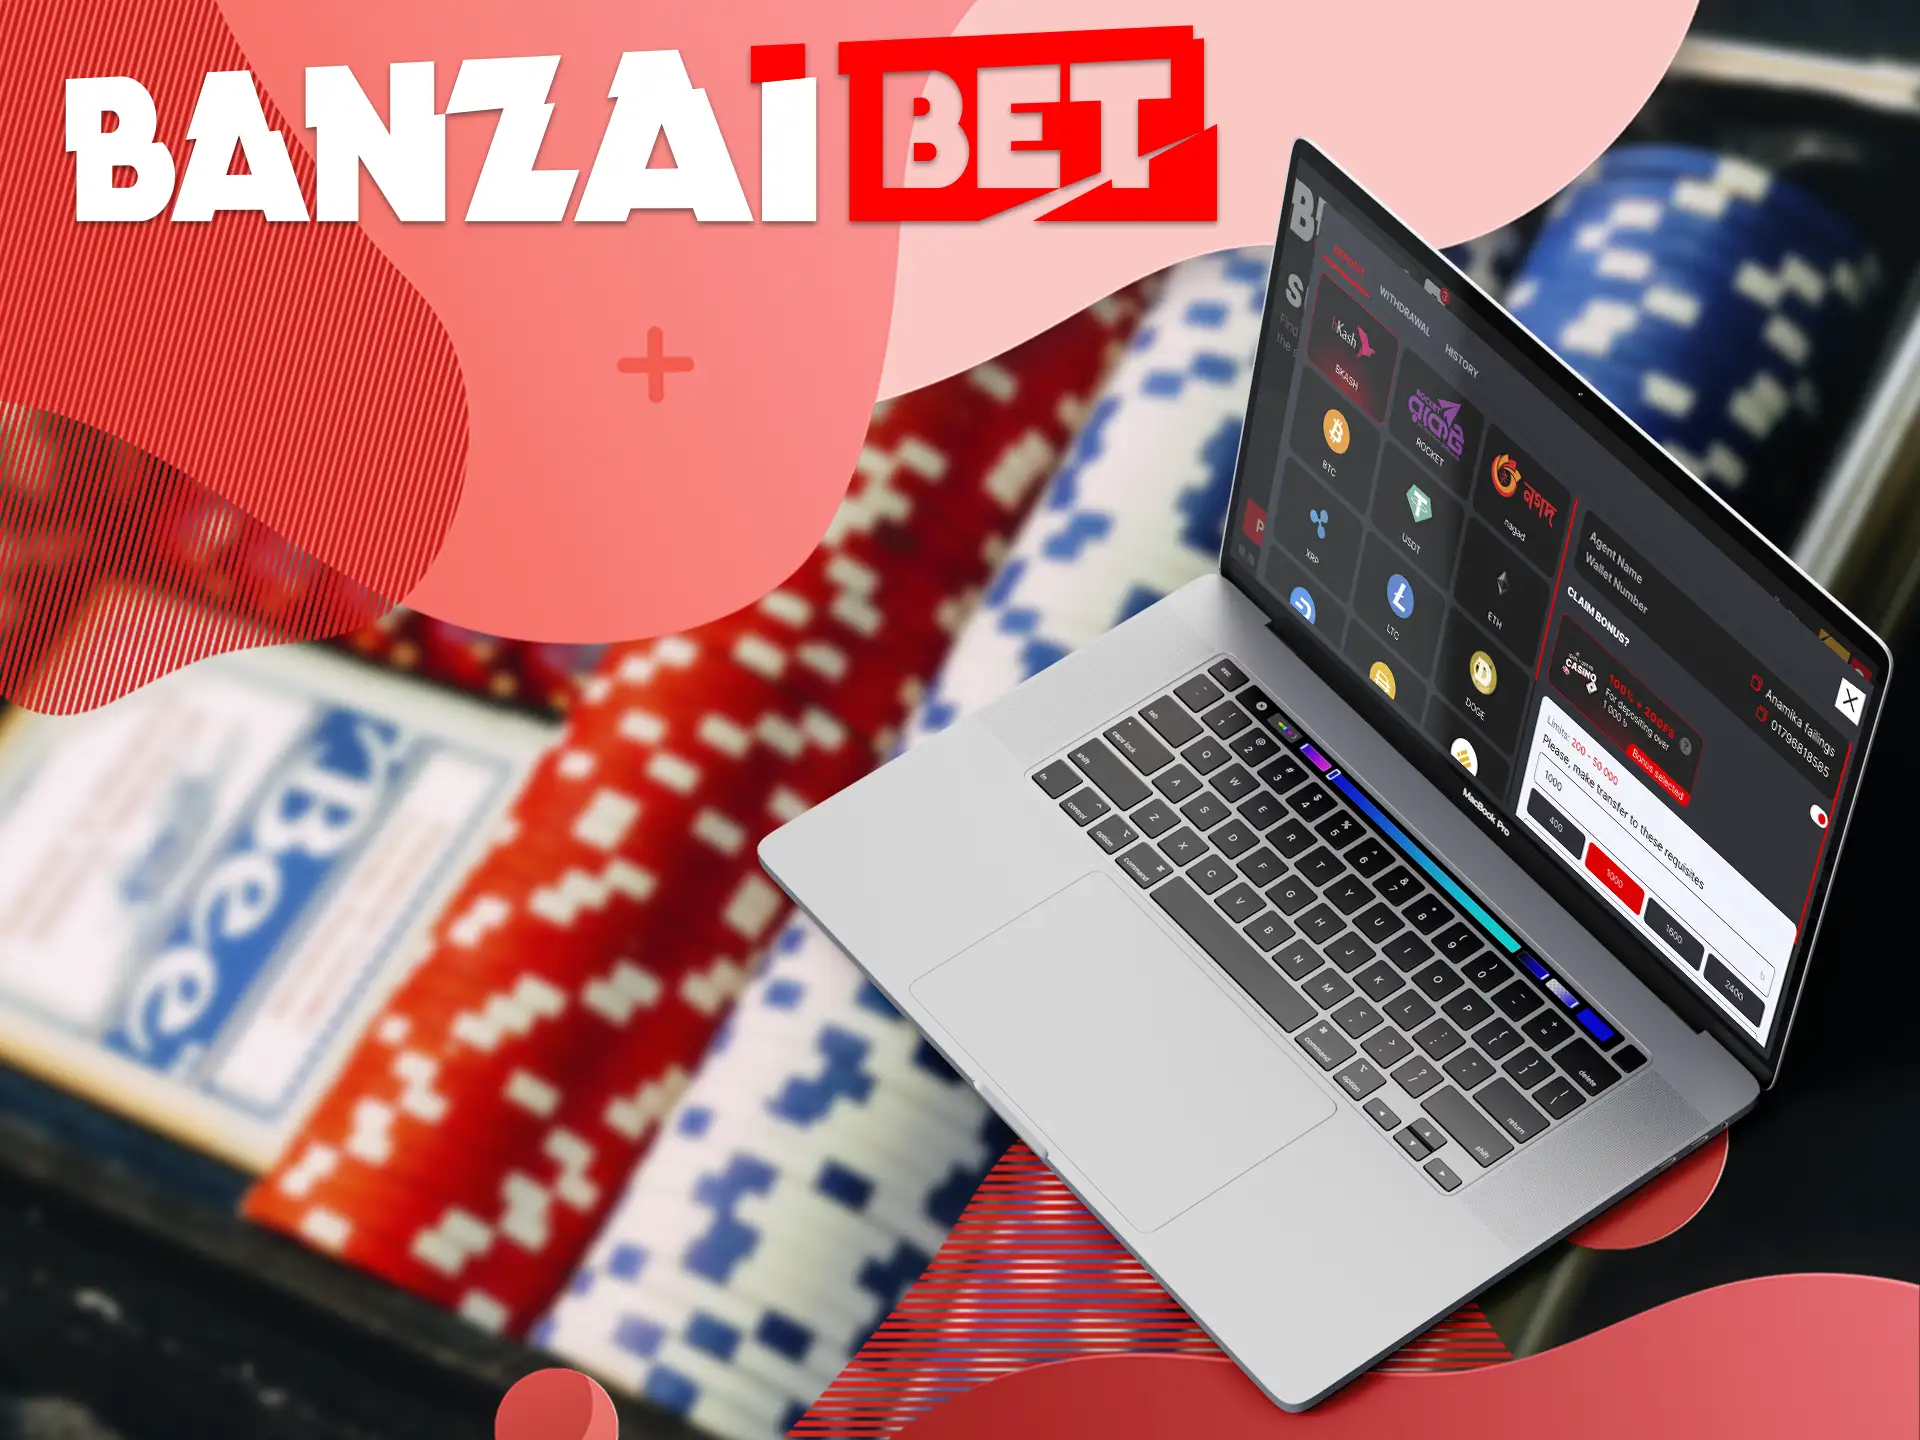 Banzai Bet offers a variety of ways for players from Bangladesh to fund their accounts.